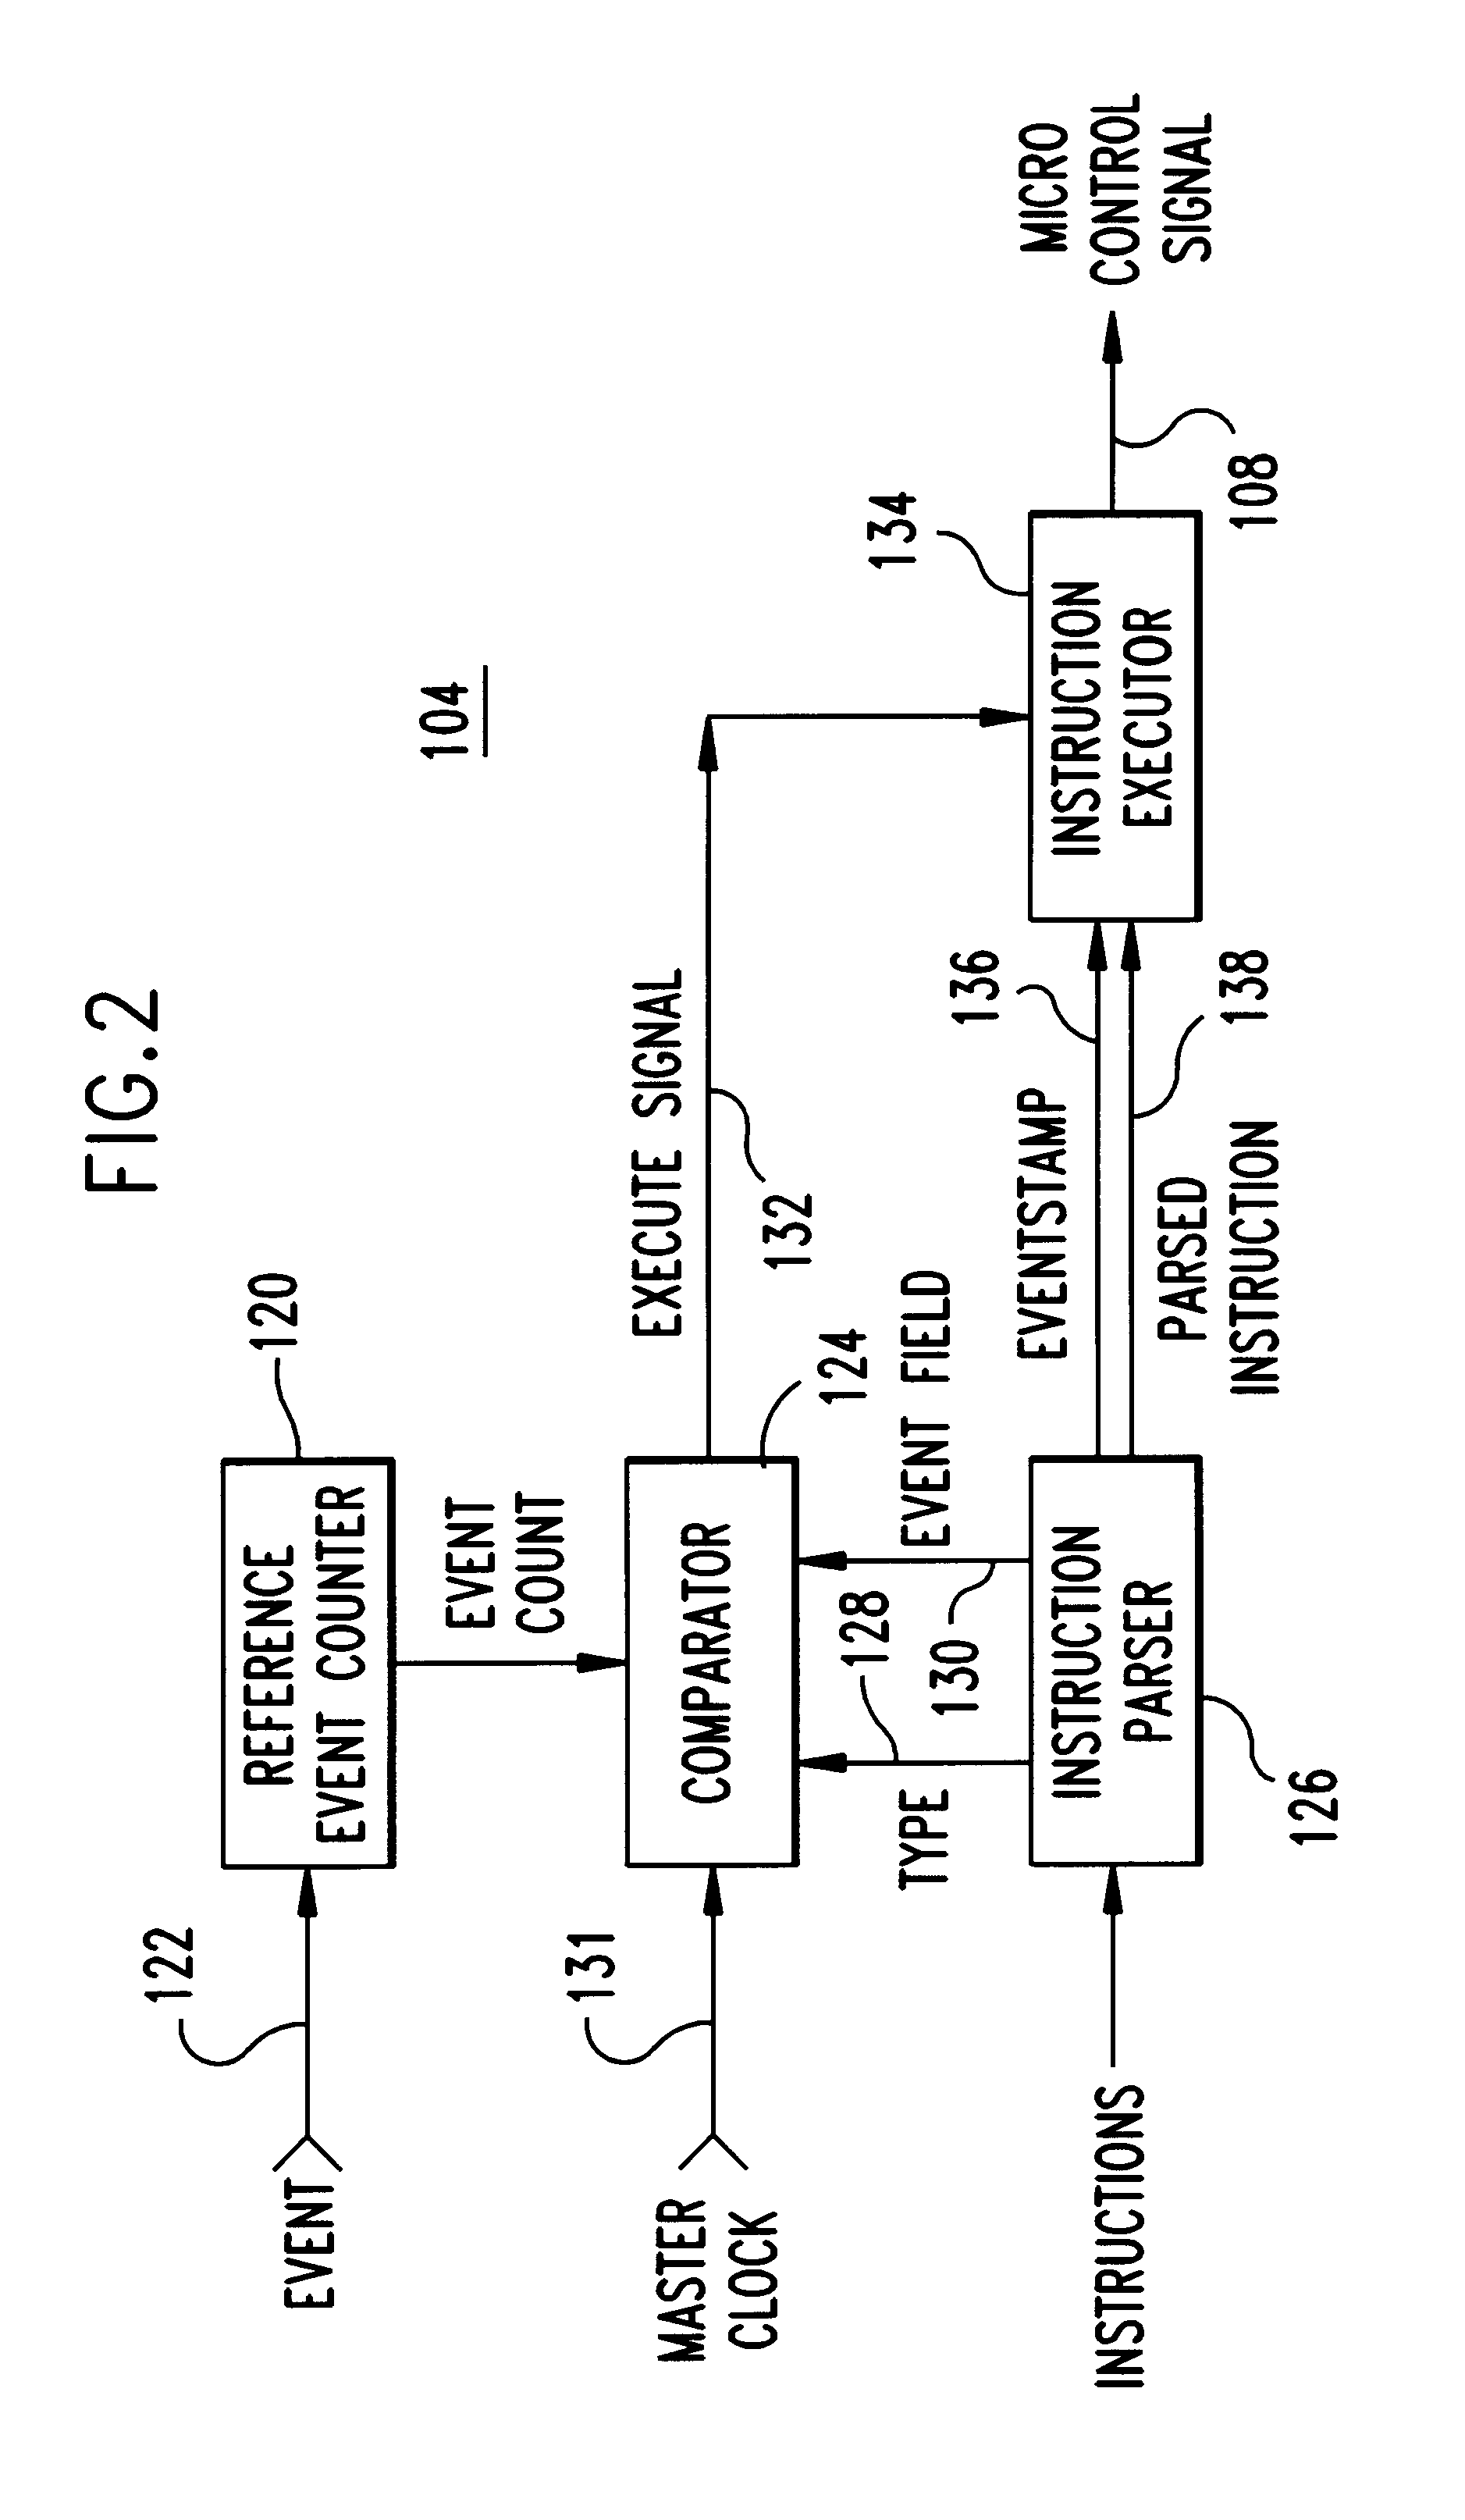 System and method for synchronizing instruction execution with external events